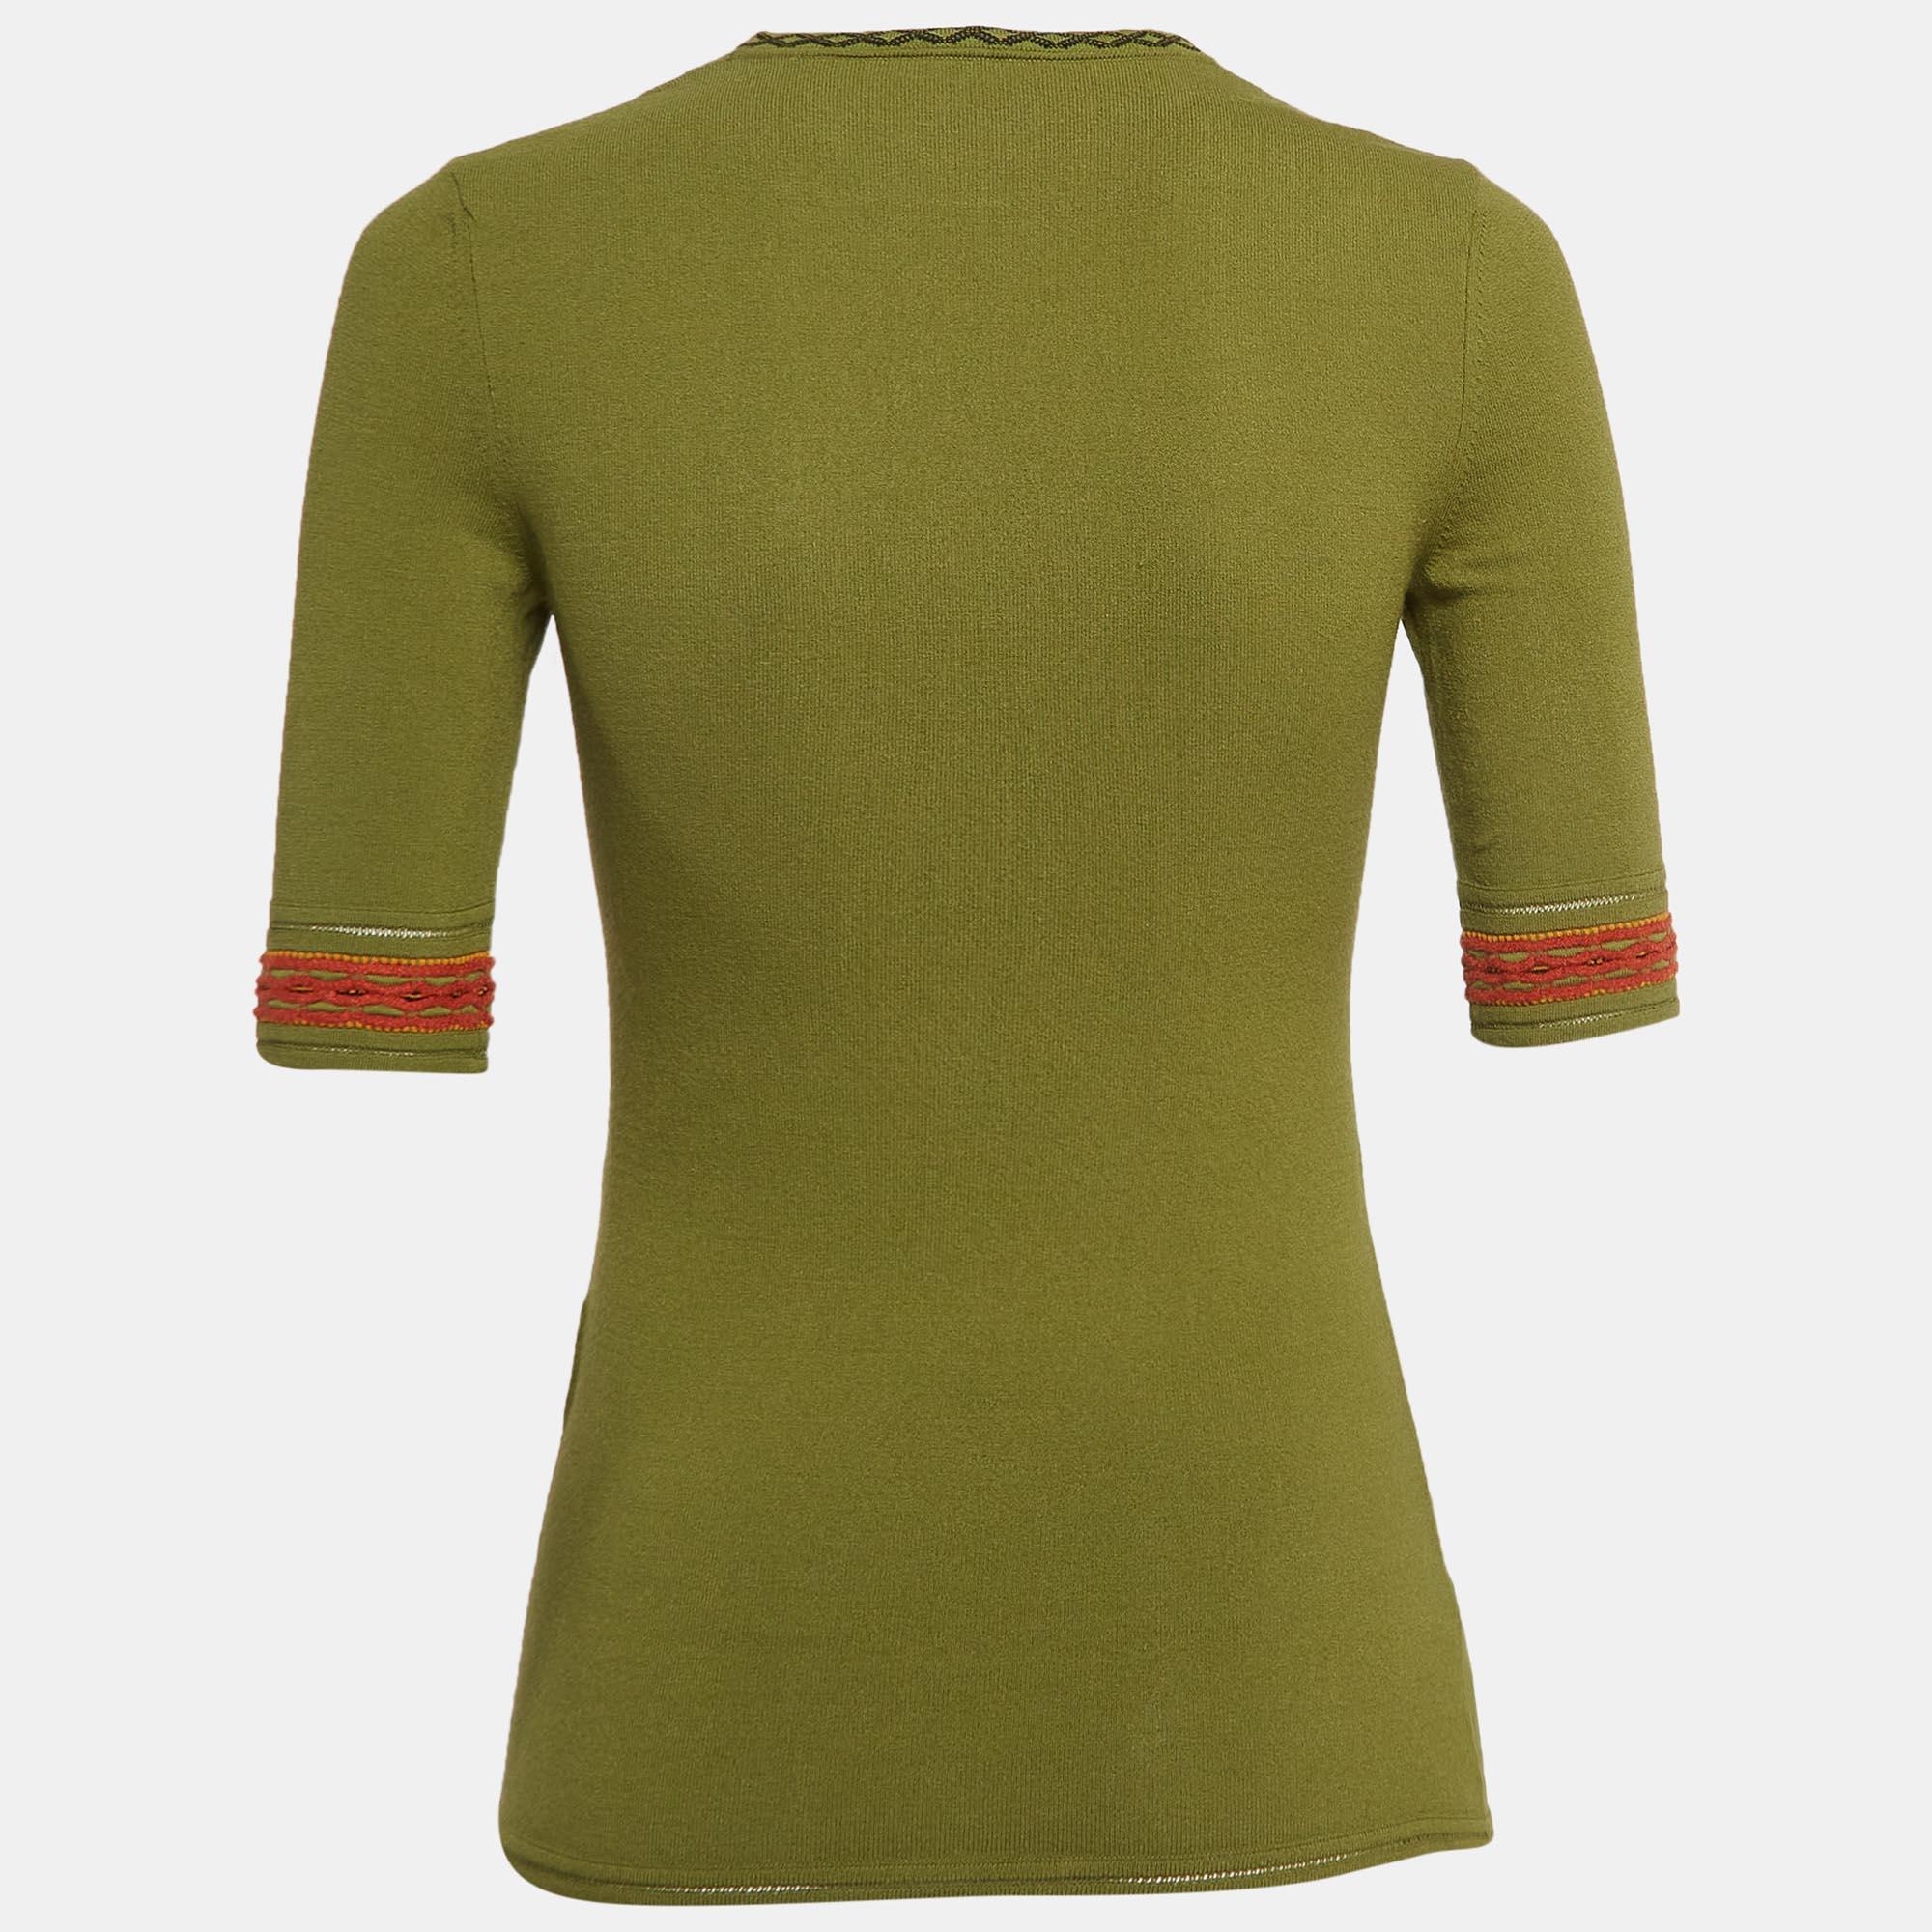 Go for stylish comfort with this women's top from M Missoni. This elegant knit top in green can be easily teamed with skirts, pants, or shorts.

